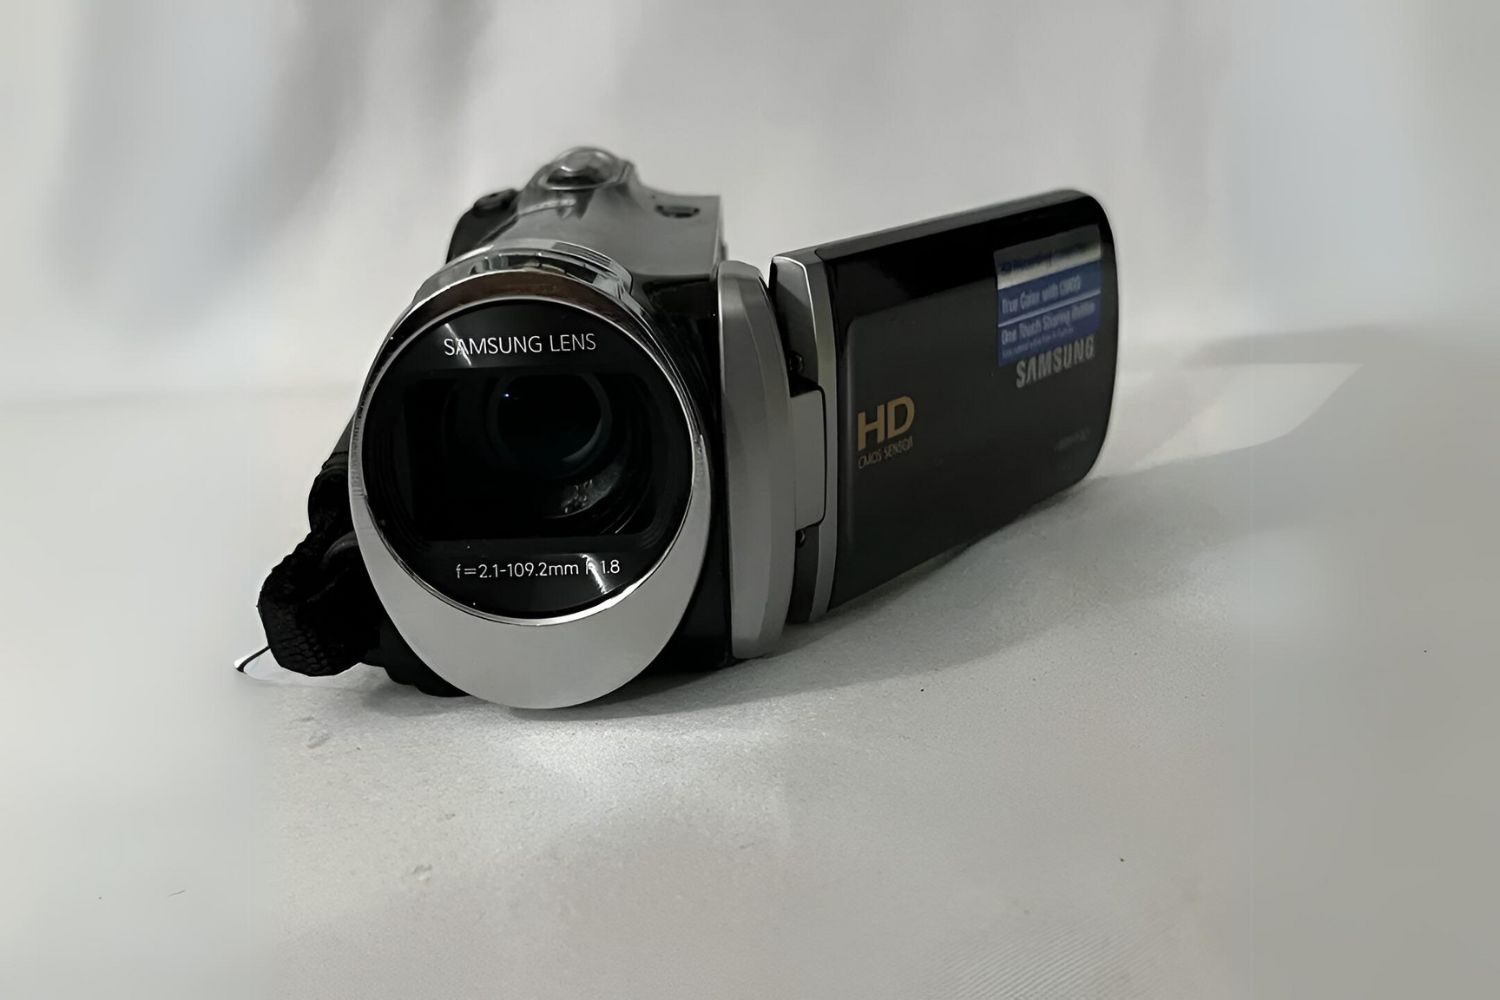 How To Add A Time Stamp On A Samsung HMX-F90 Black Camcorder